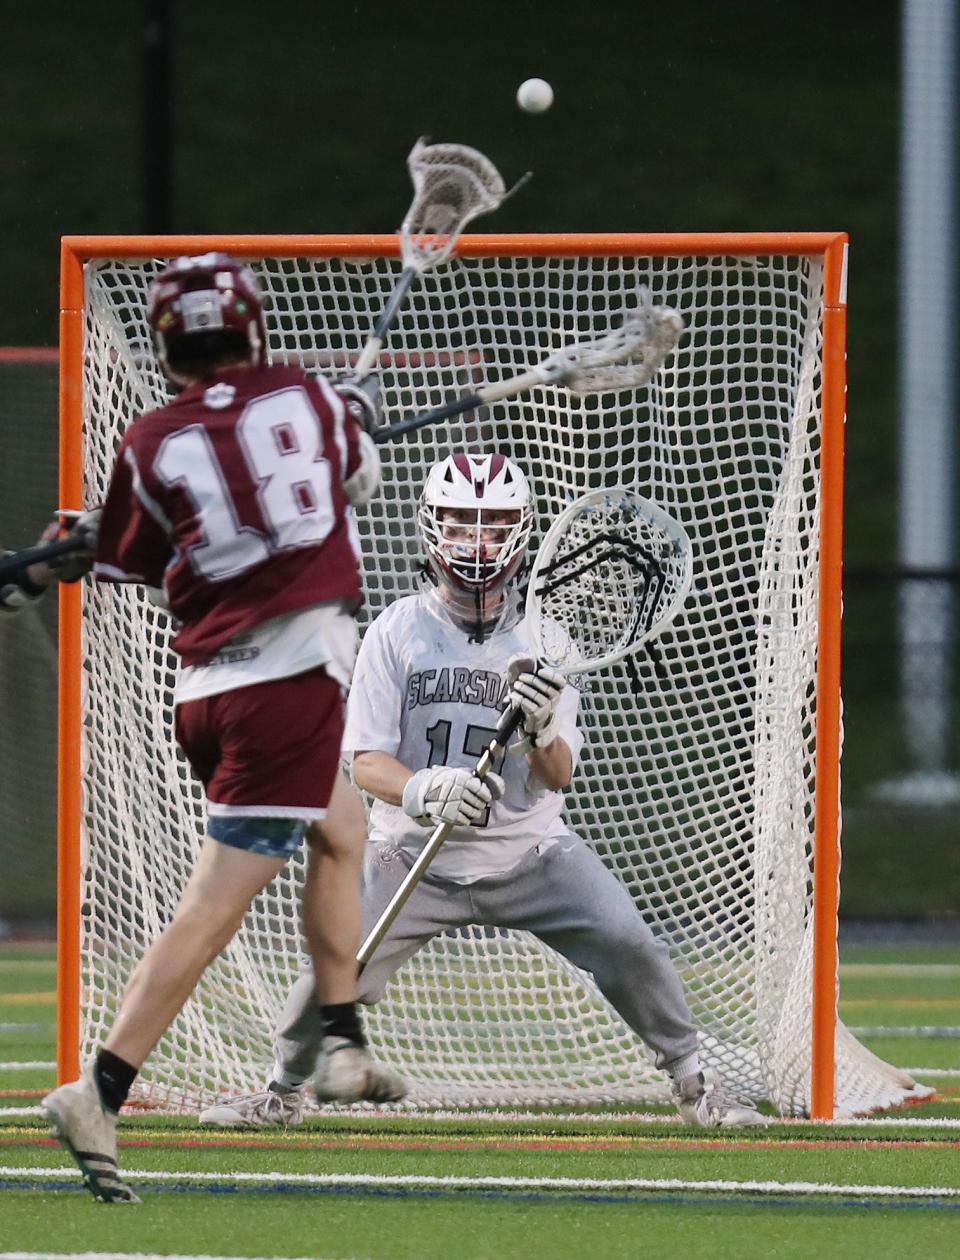 Kingston's Cody Baker (18) fires a shot on Scarsdale goalie Andrew Lehrman (17) during a boys lacrosse sub-regional playoff game at Mamaroneck High School on June 1.